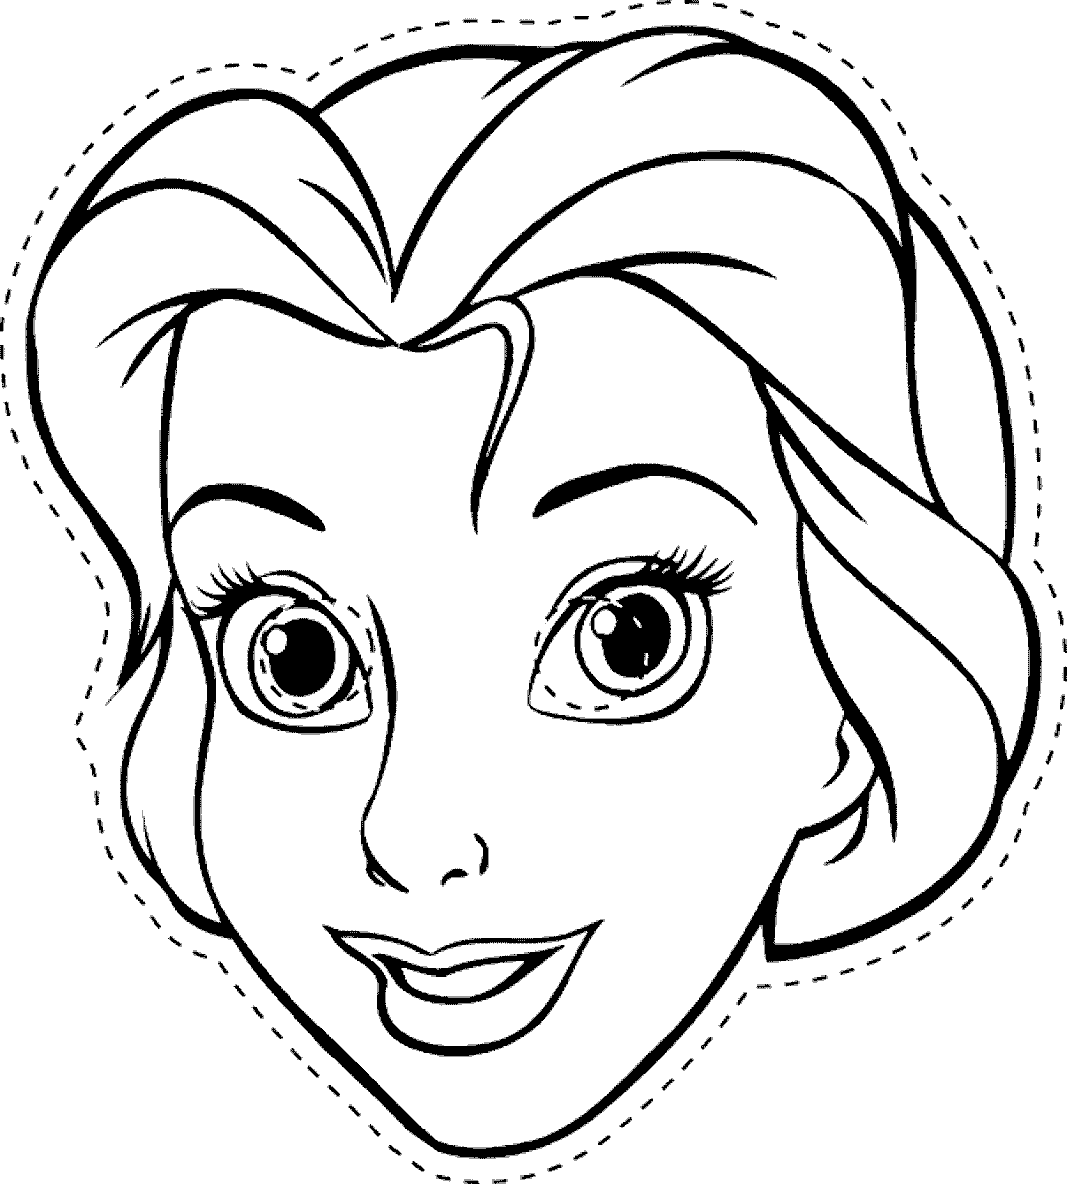 Printable Belle Face Coloring Pages #5262 Belle Face Coloring ...